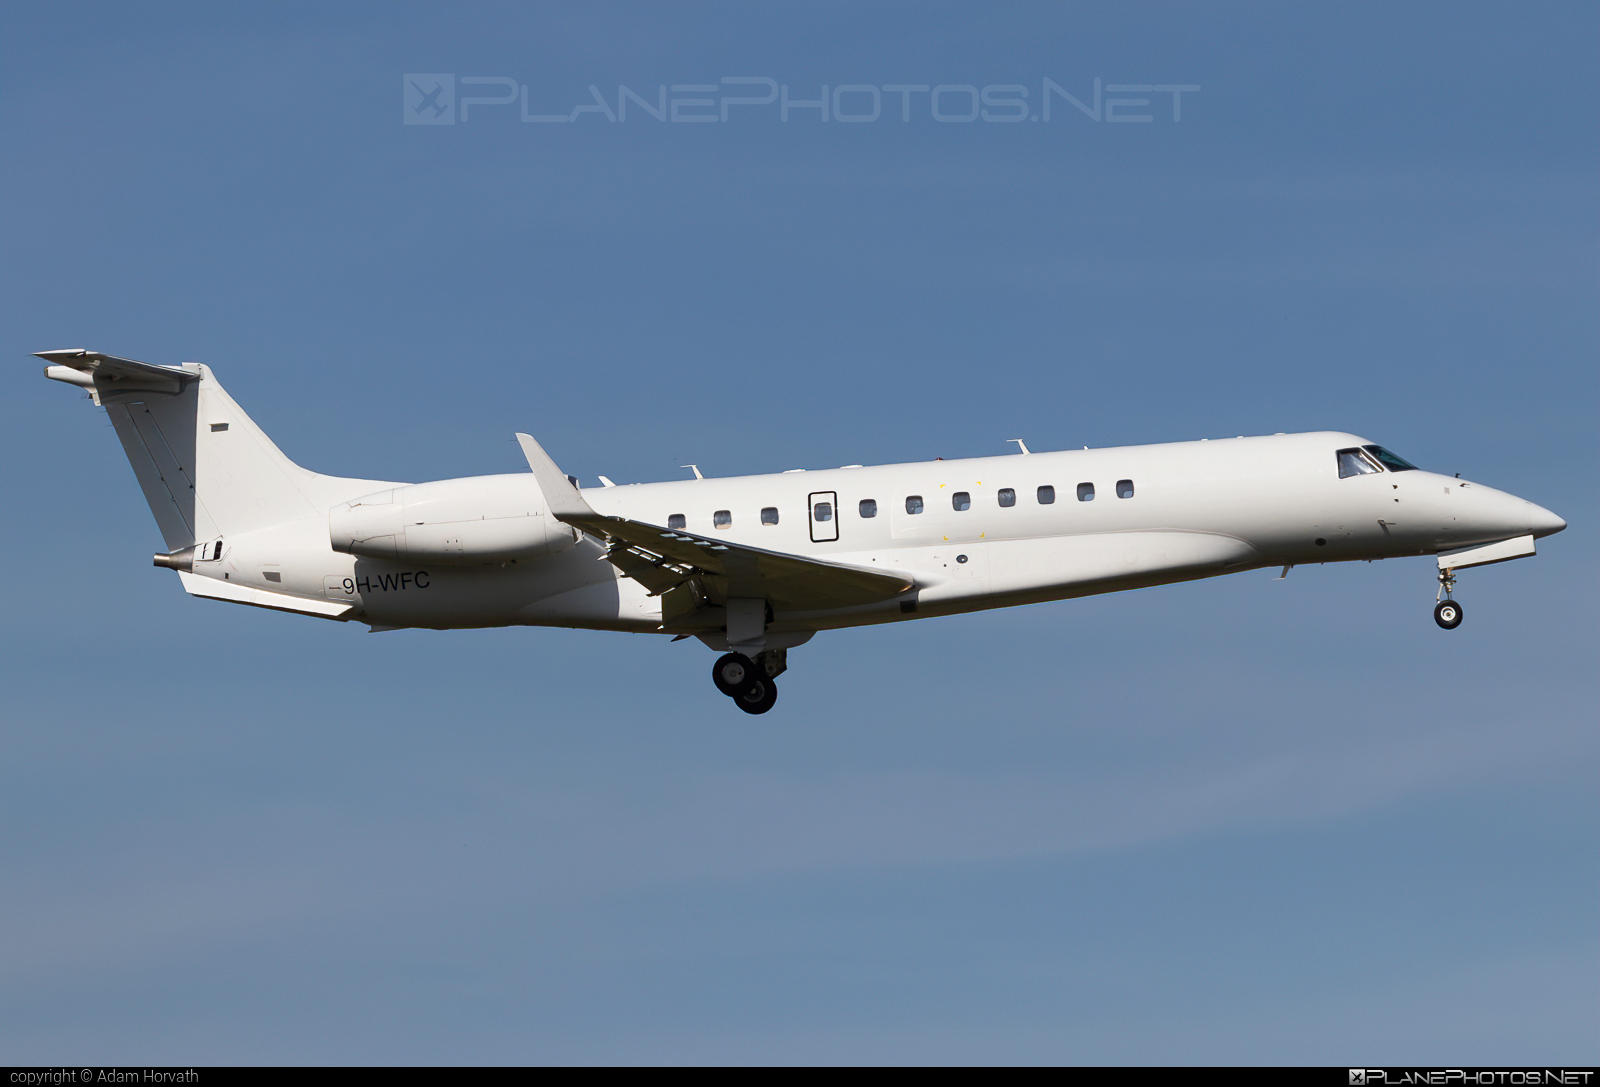 Embraer ERJ-135BJ Legacy 600 - 9H-WFC operated by Private operator #embraer #embraer135 #embraerlegacy #erj135 #erj135bj #legacy600